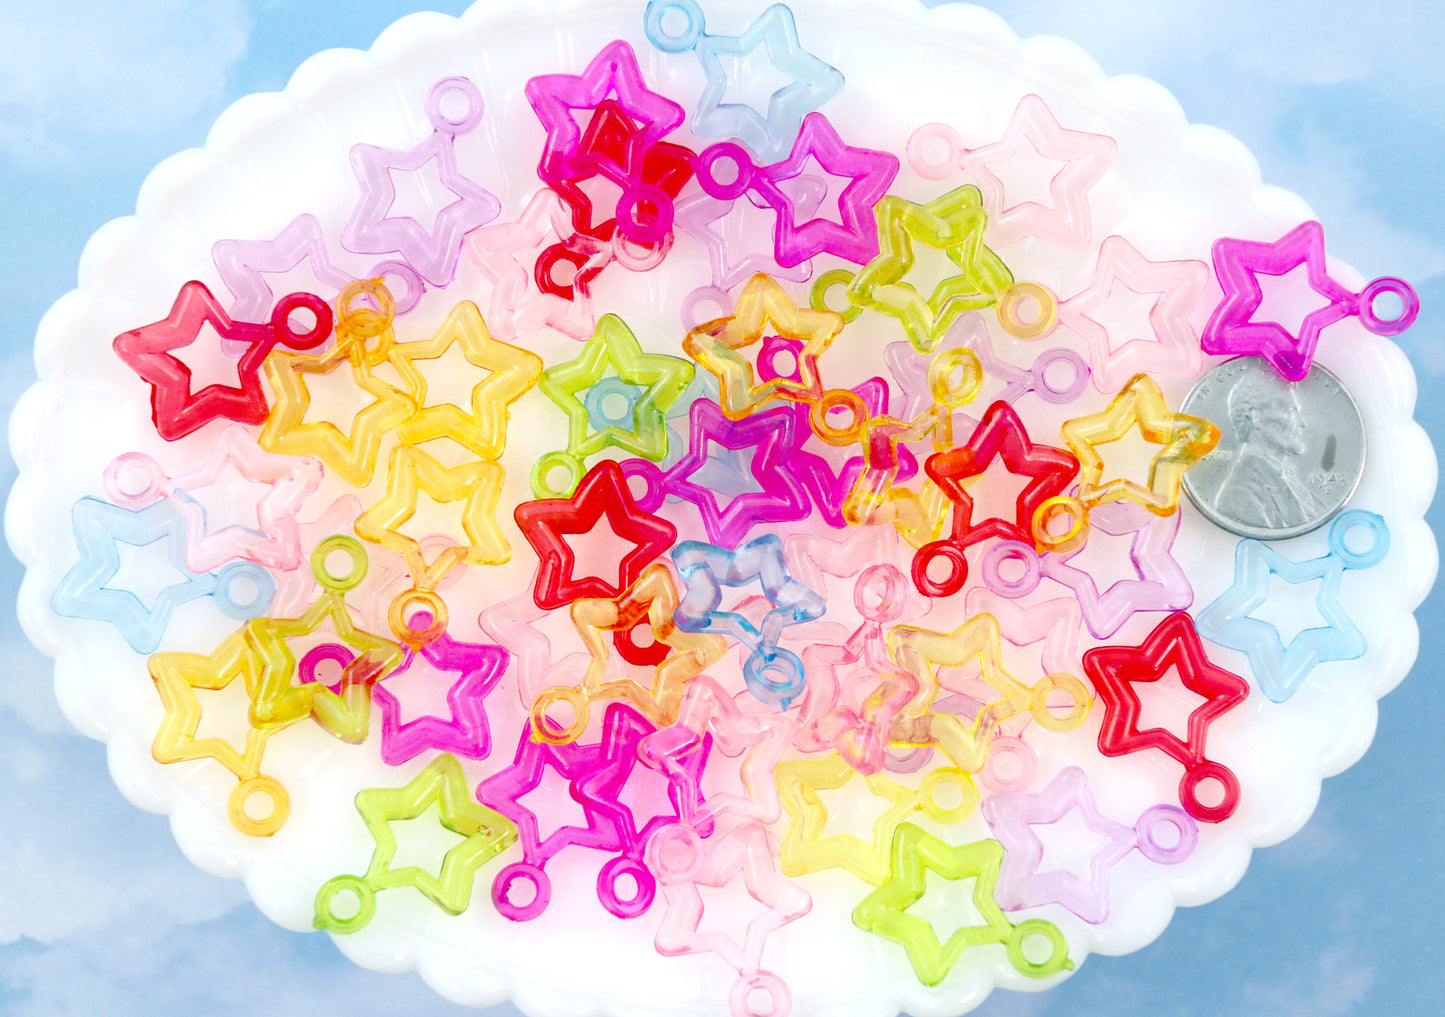 Plastic Star Charms - 20mm Transparent Star Outline Plastic or Acrylic Charms or Pendants - 100 pc set